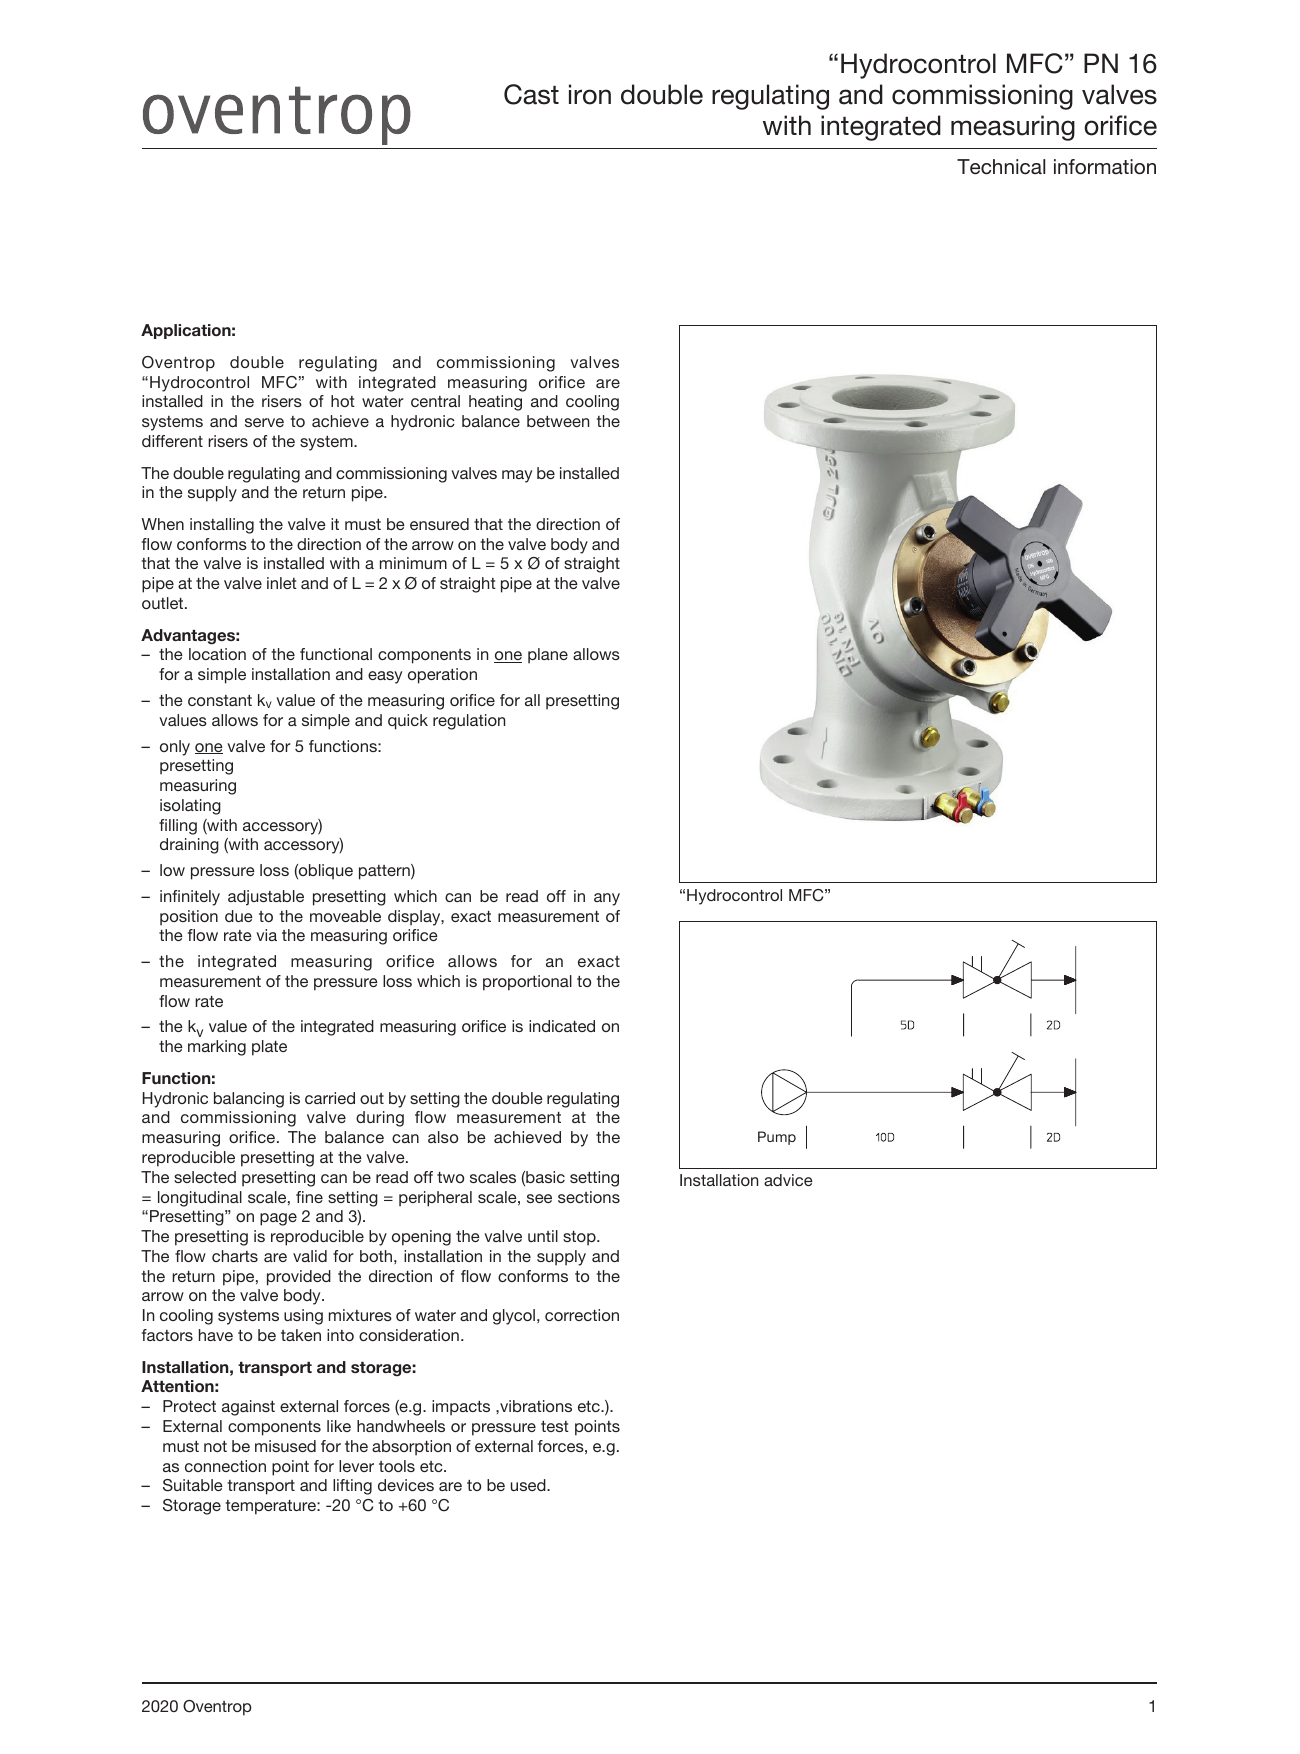 Double regulating and Oventrop commissioning valve "Hydrocontrol MFC" PN 16 